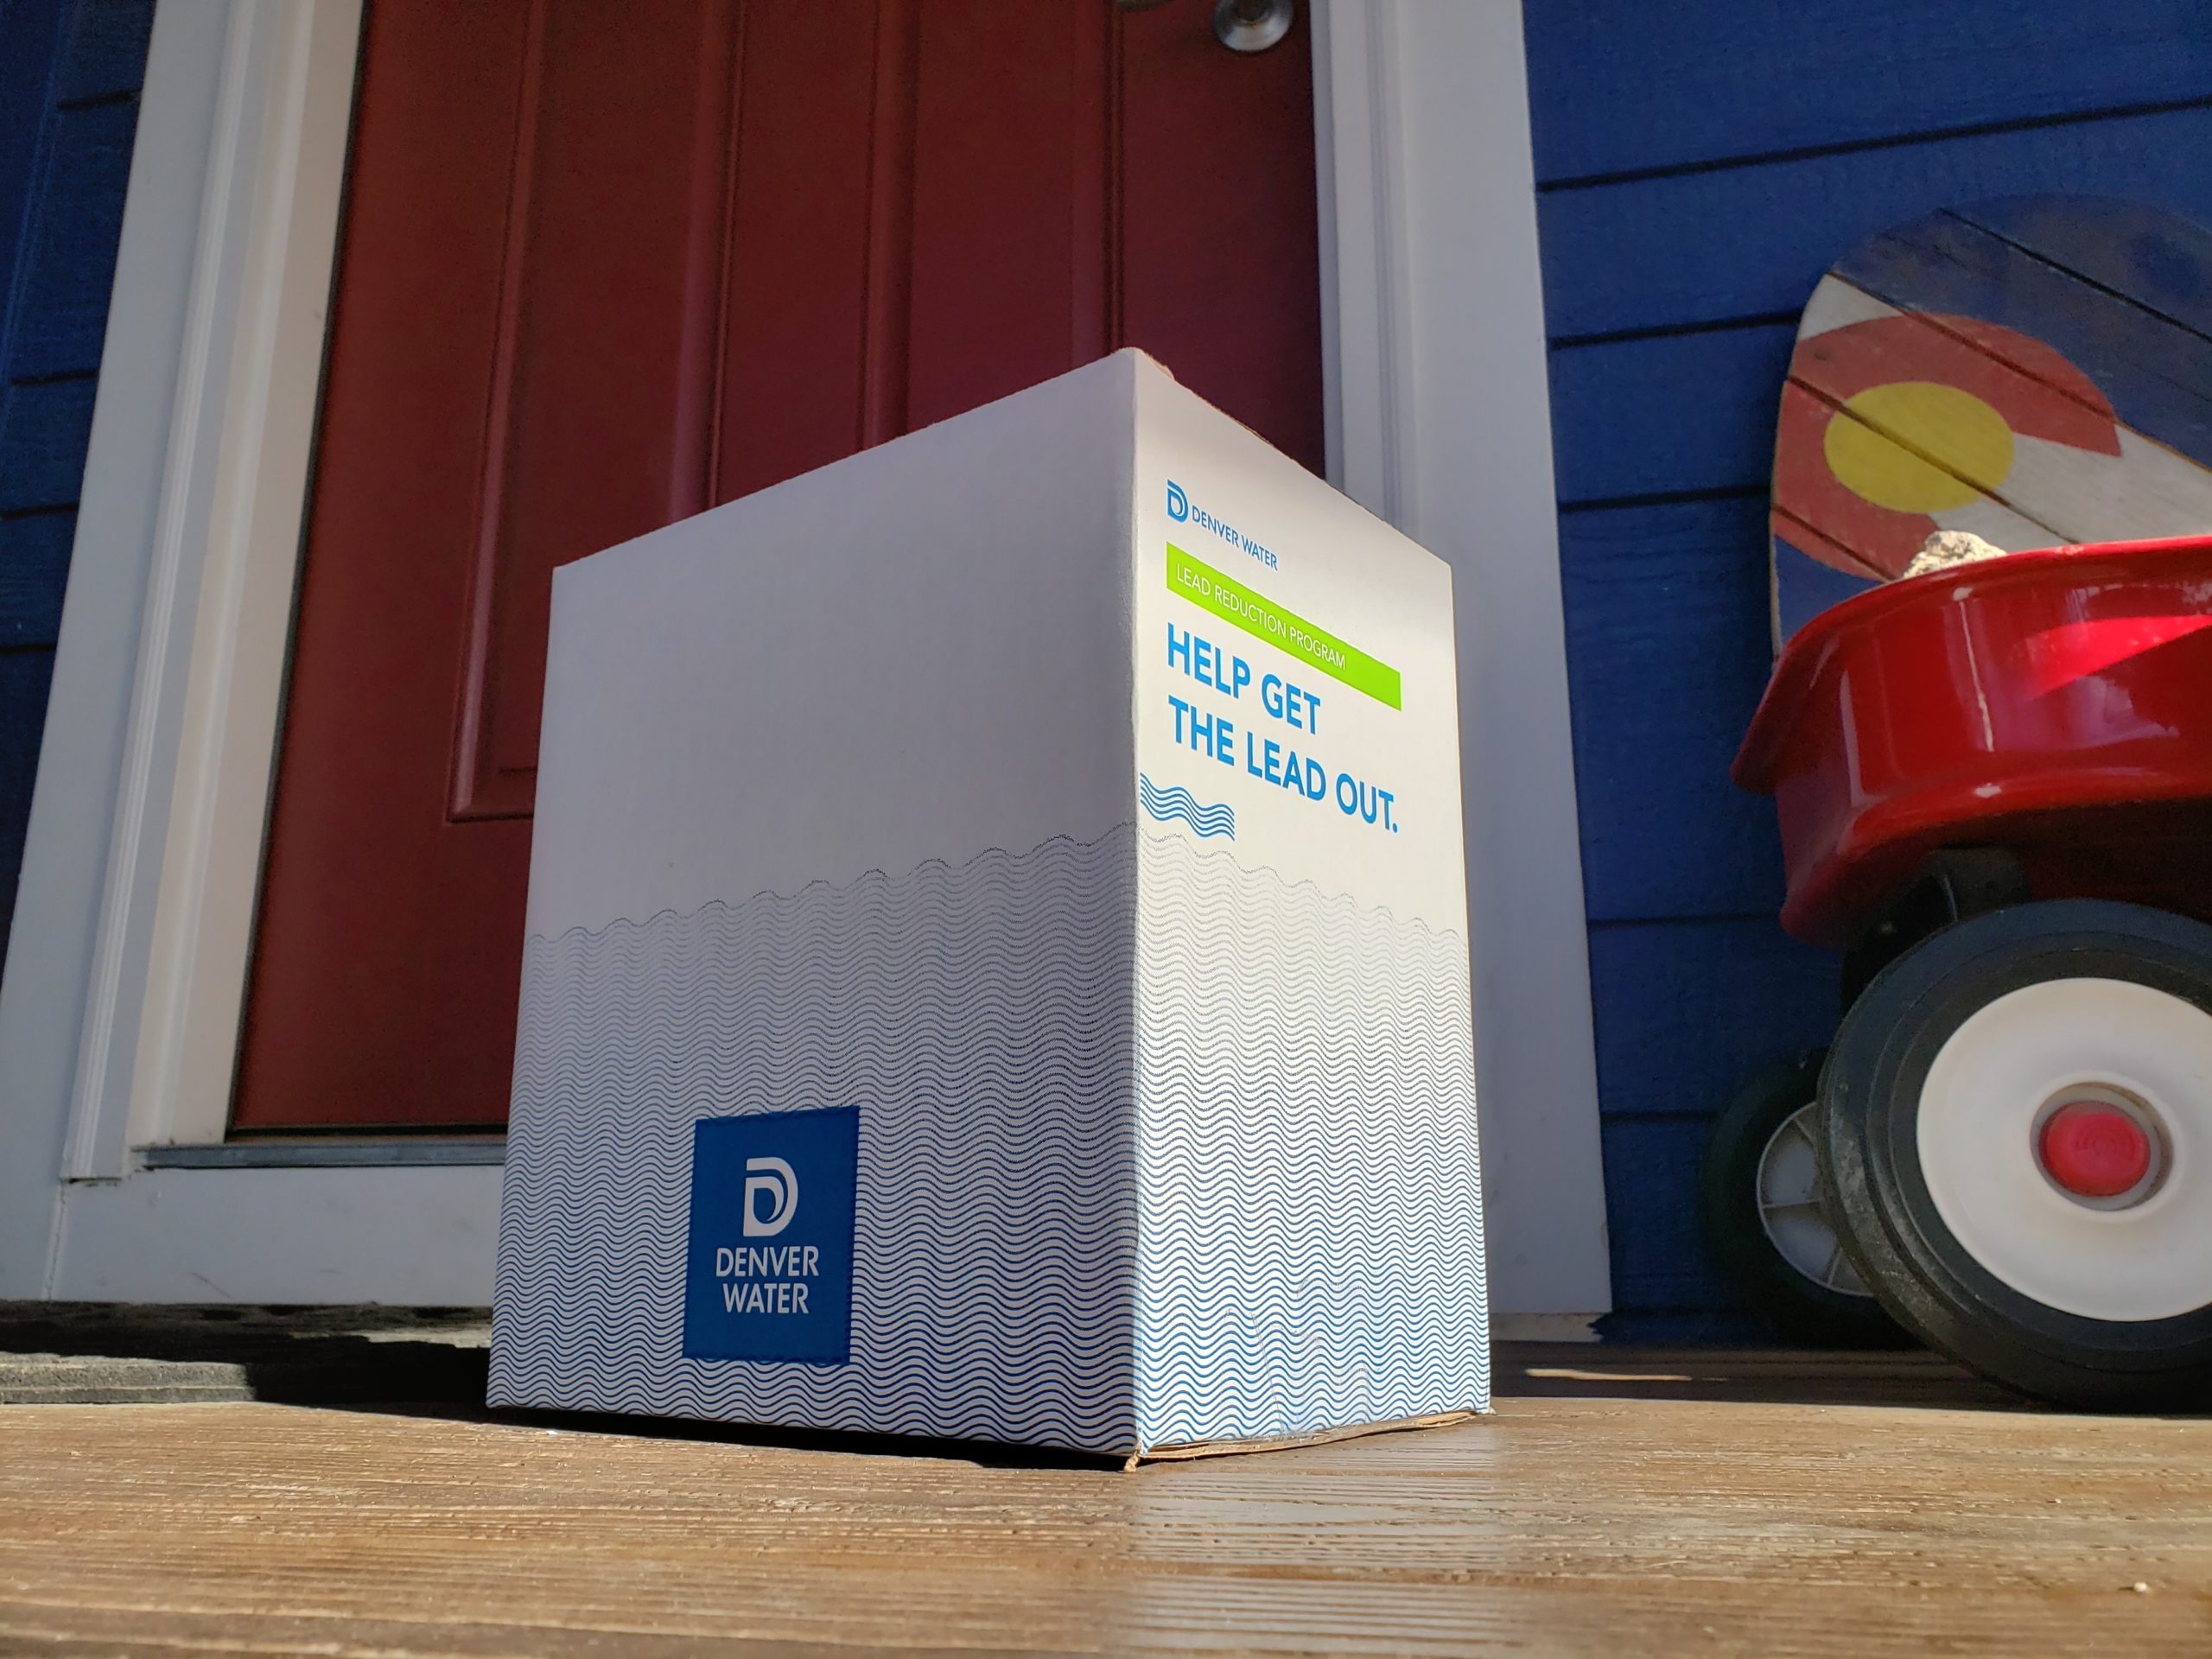 A box on a porch from Denver Water that read "Help get the lead out."